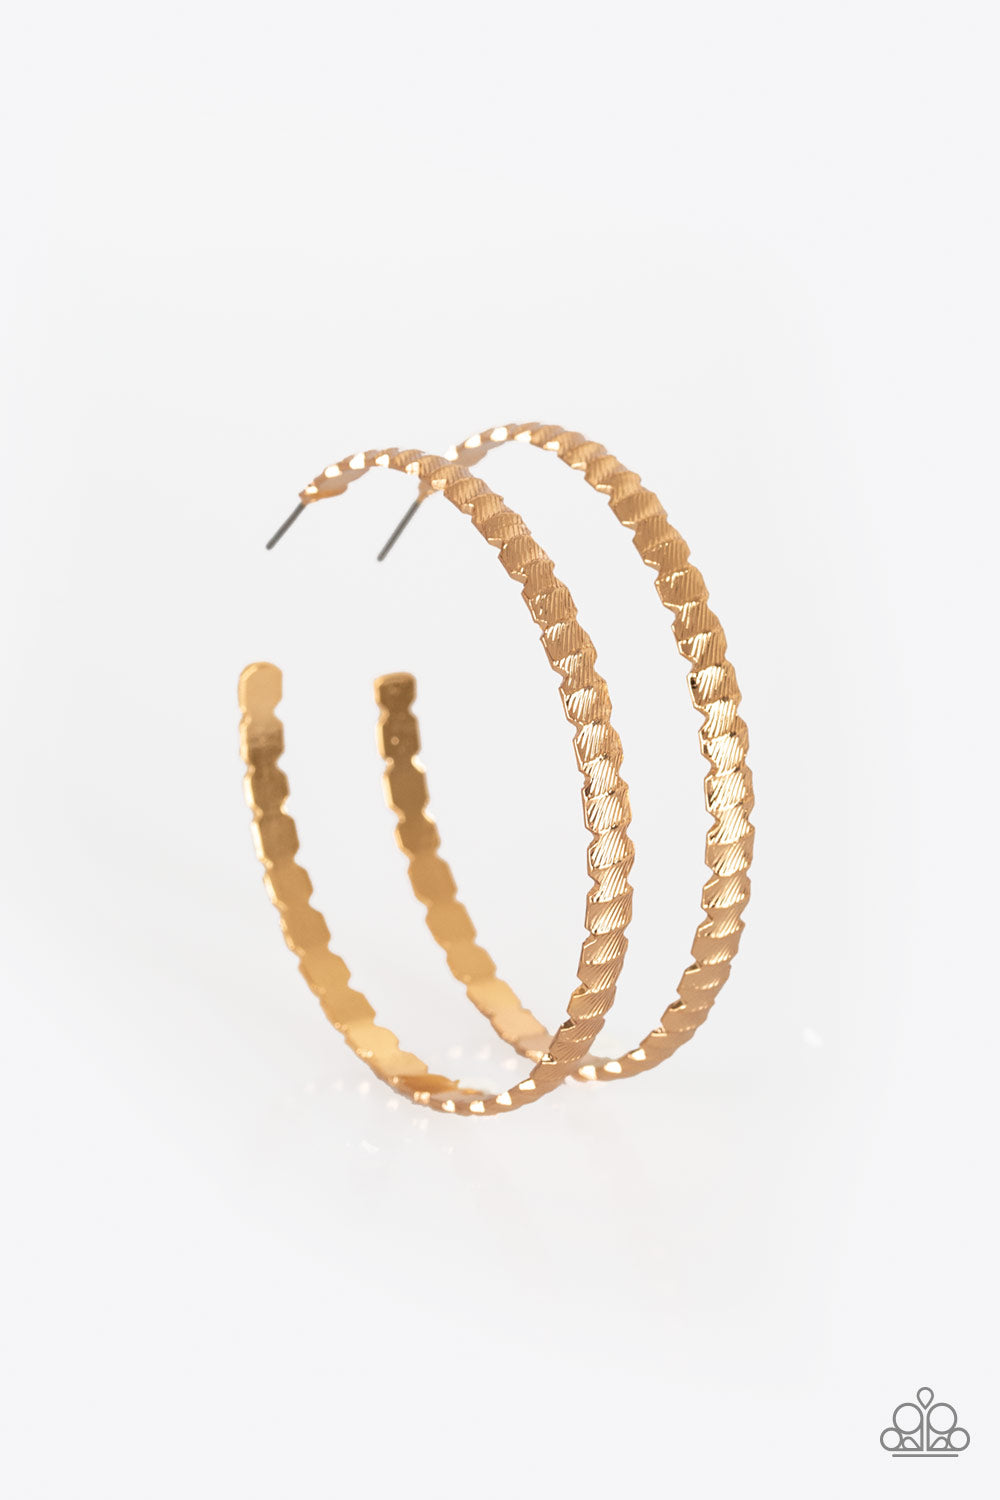 TOTALLY OFF THE HOOP - GOLD TEXTURED SCALLOPED LARGE HOOP EARRINGS